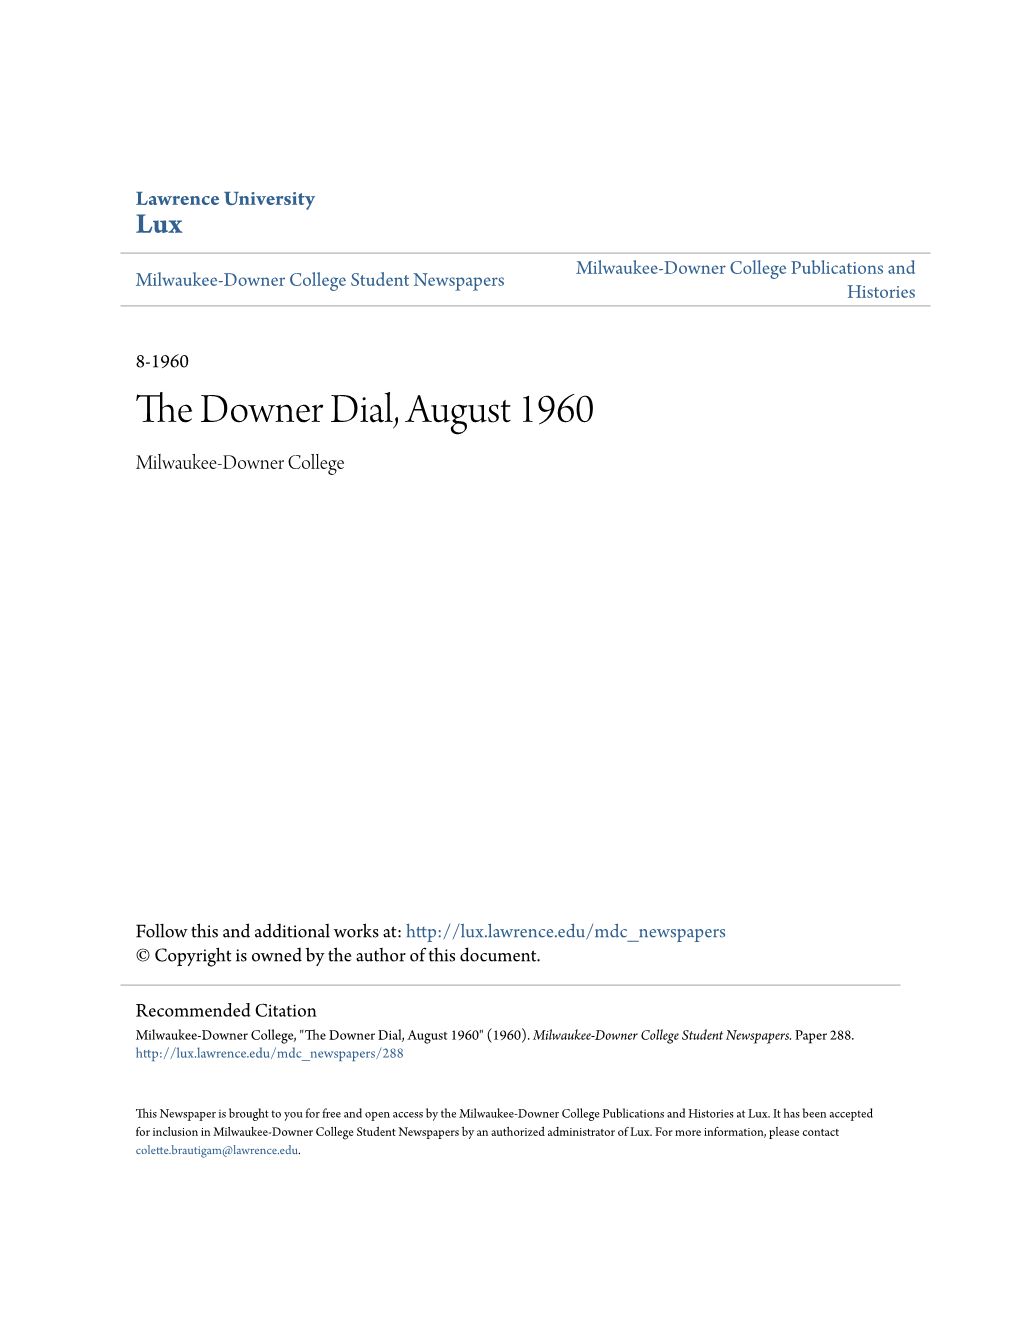 The Downer Dial, August 1960